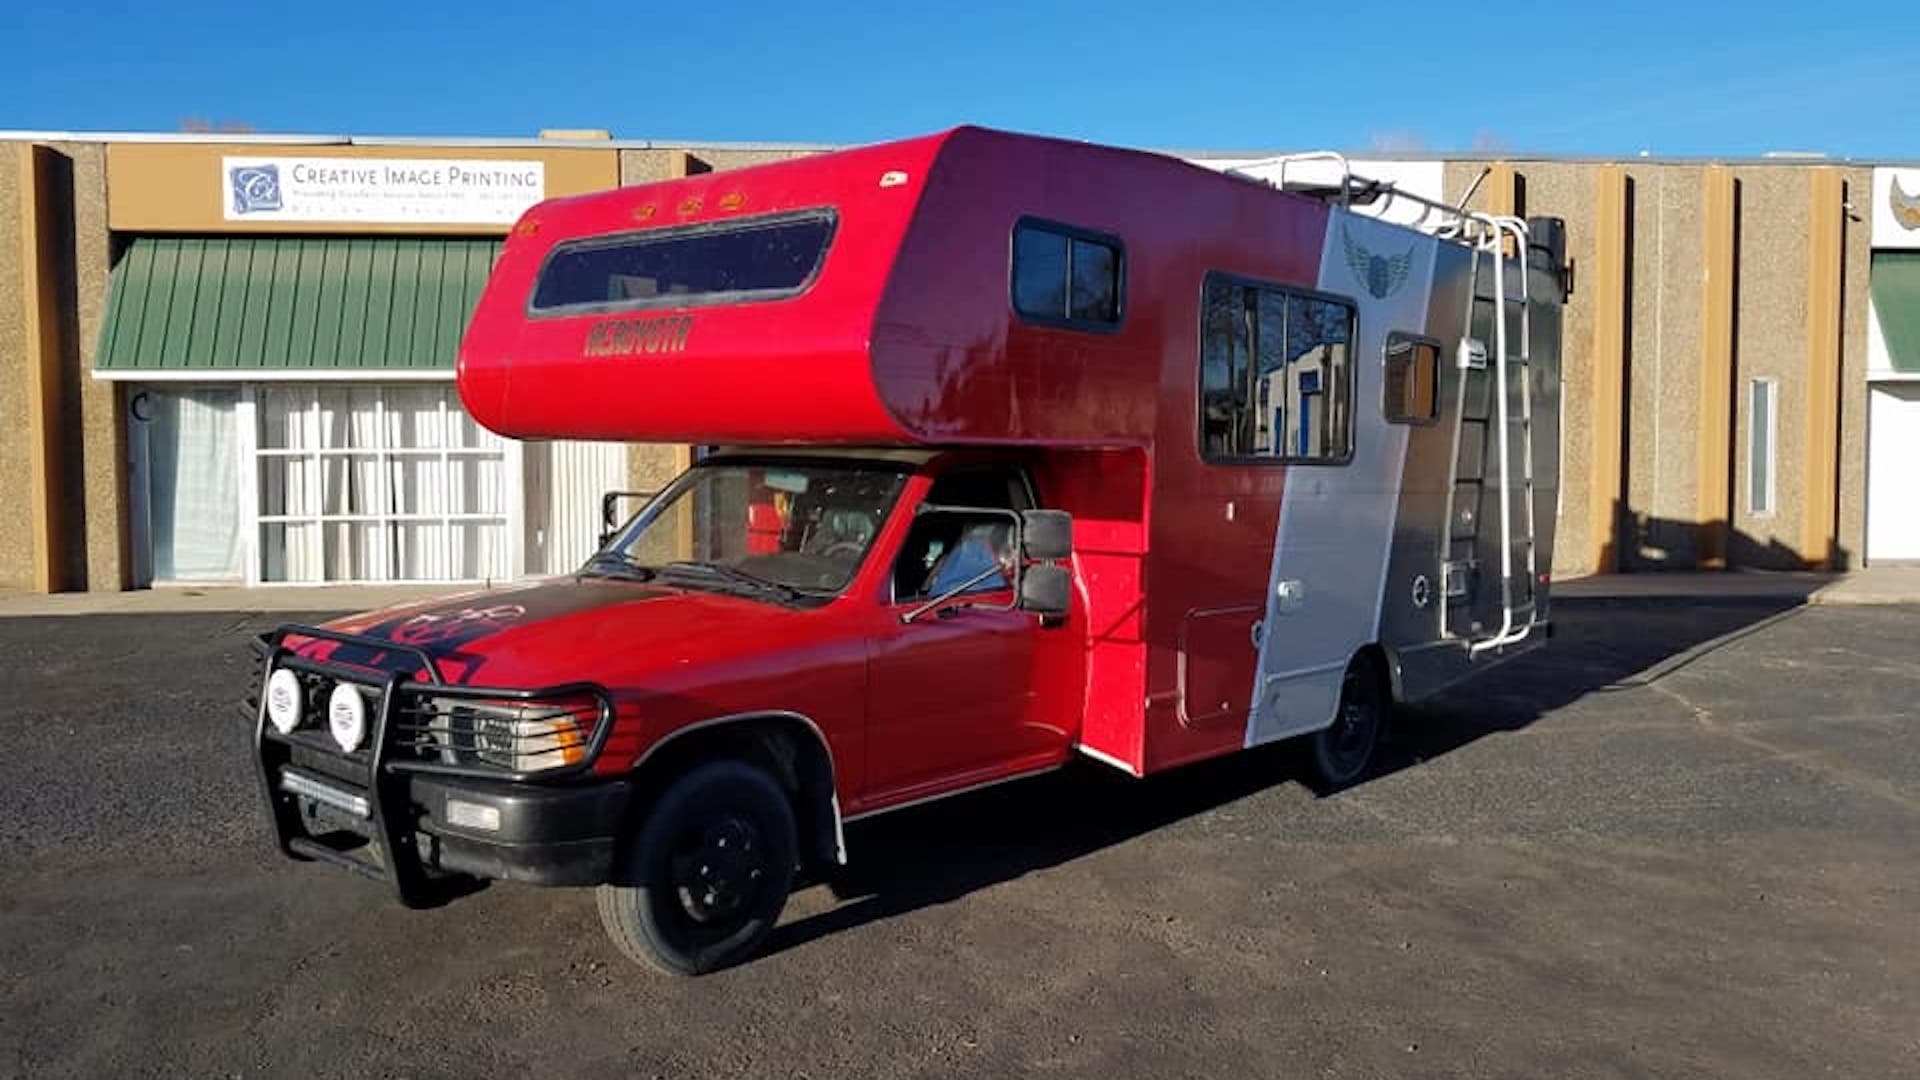 This Toyota Pickup-Based, Engine-Swapped Overland RV Is Your Ticket Off the Grid